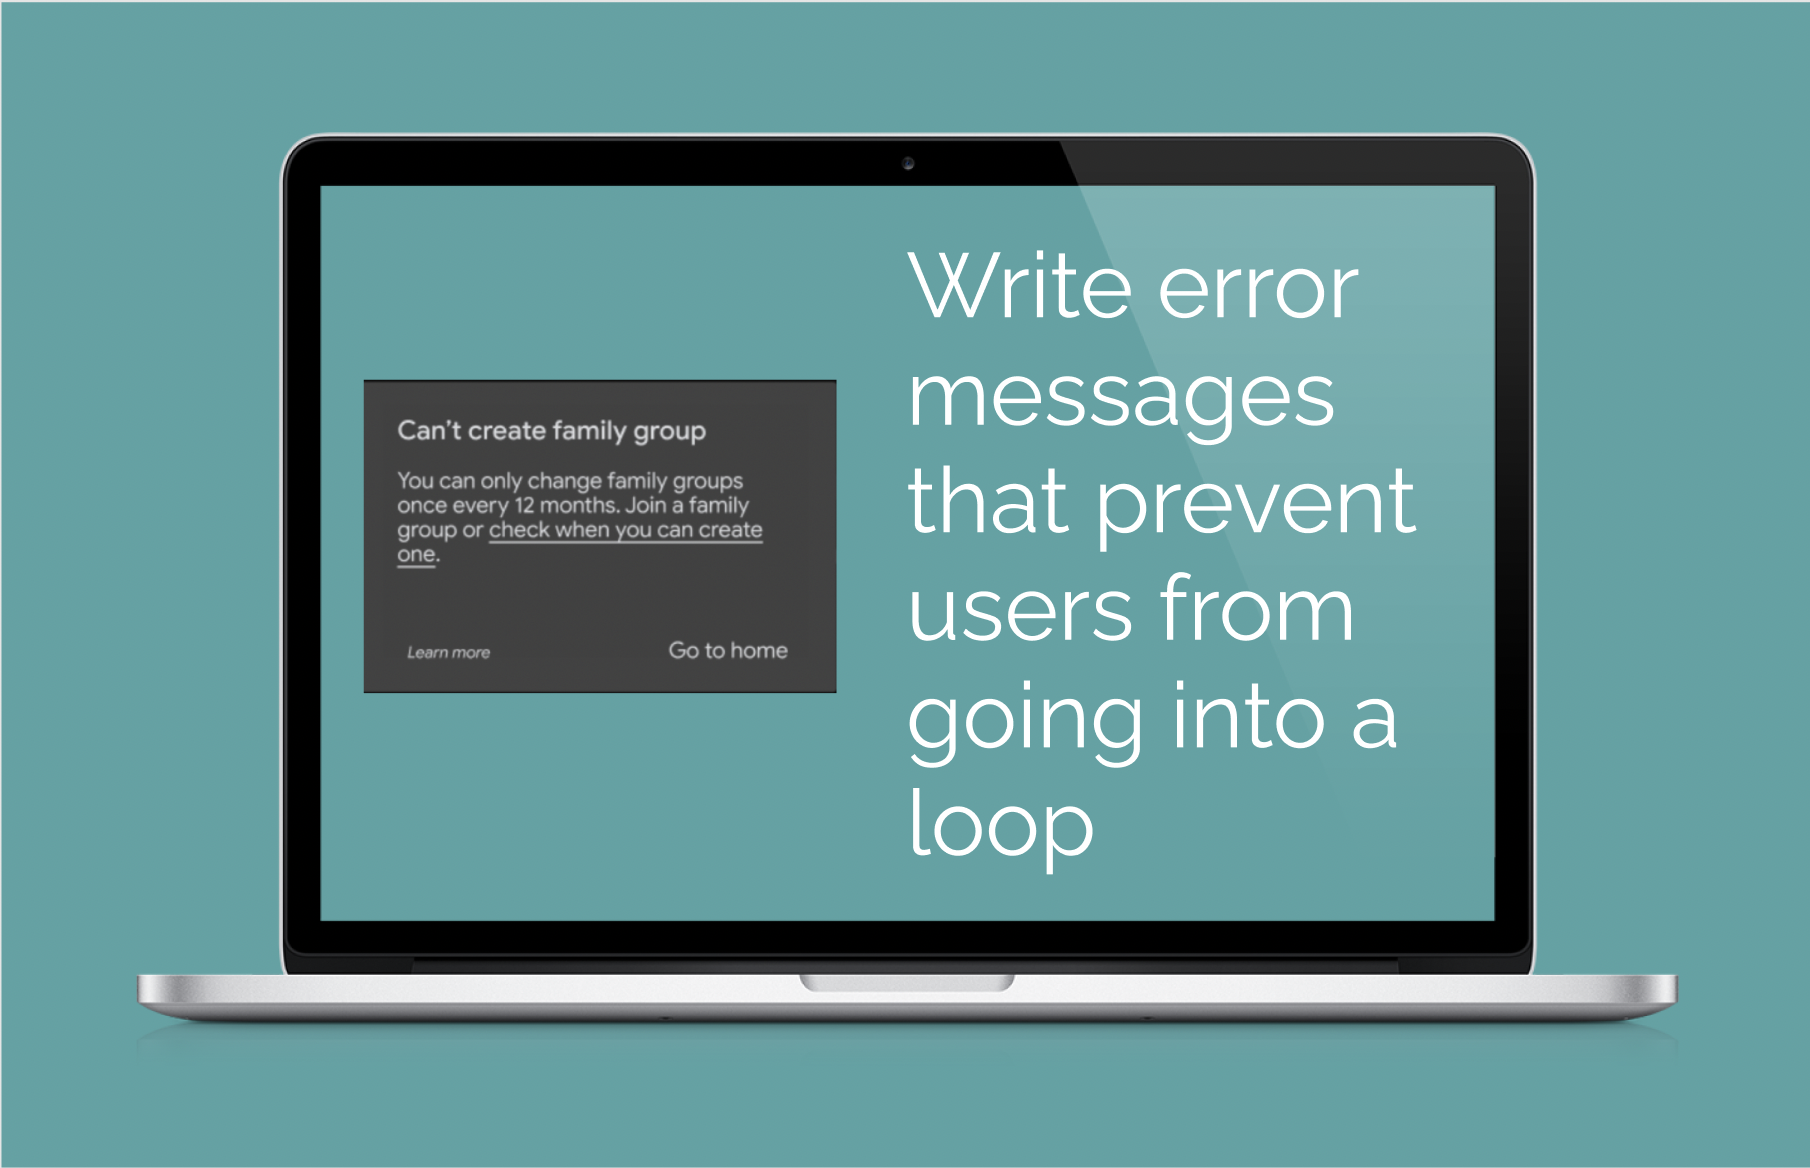 Error message: Prevent users from going into a loop